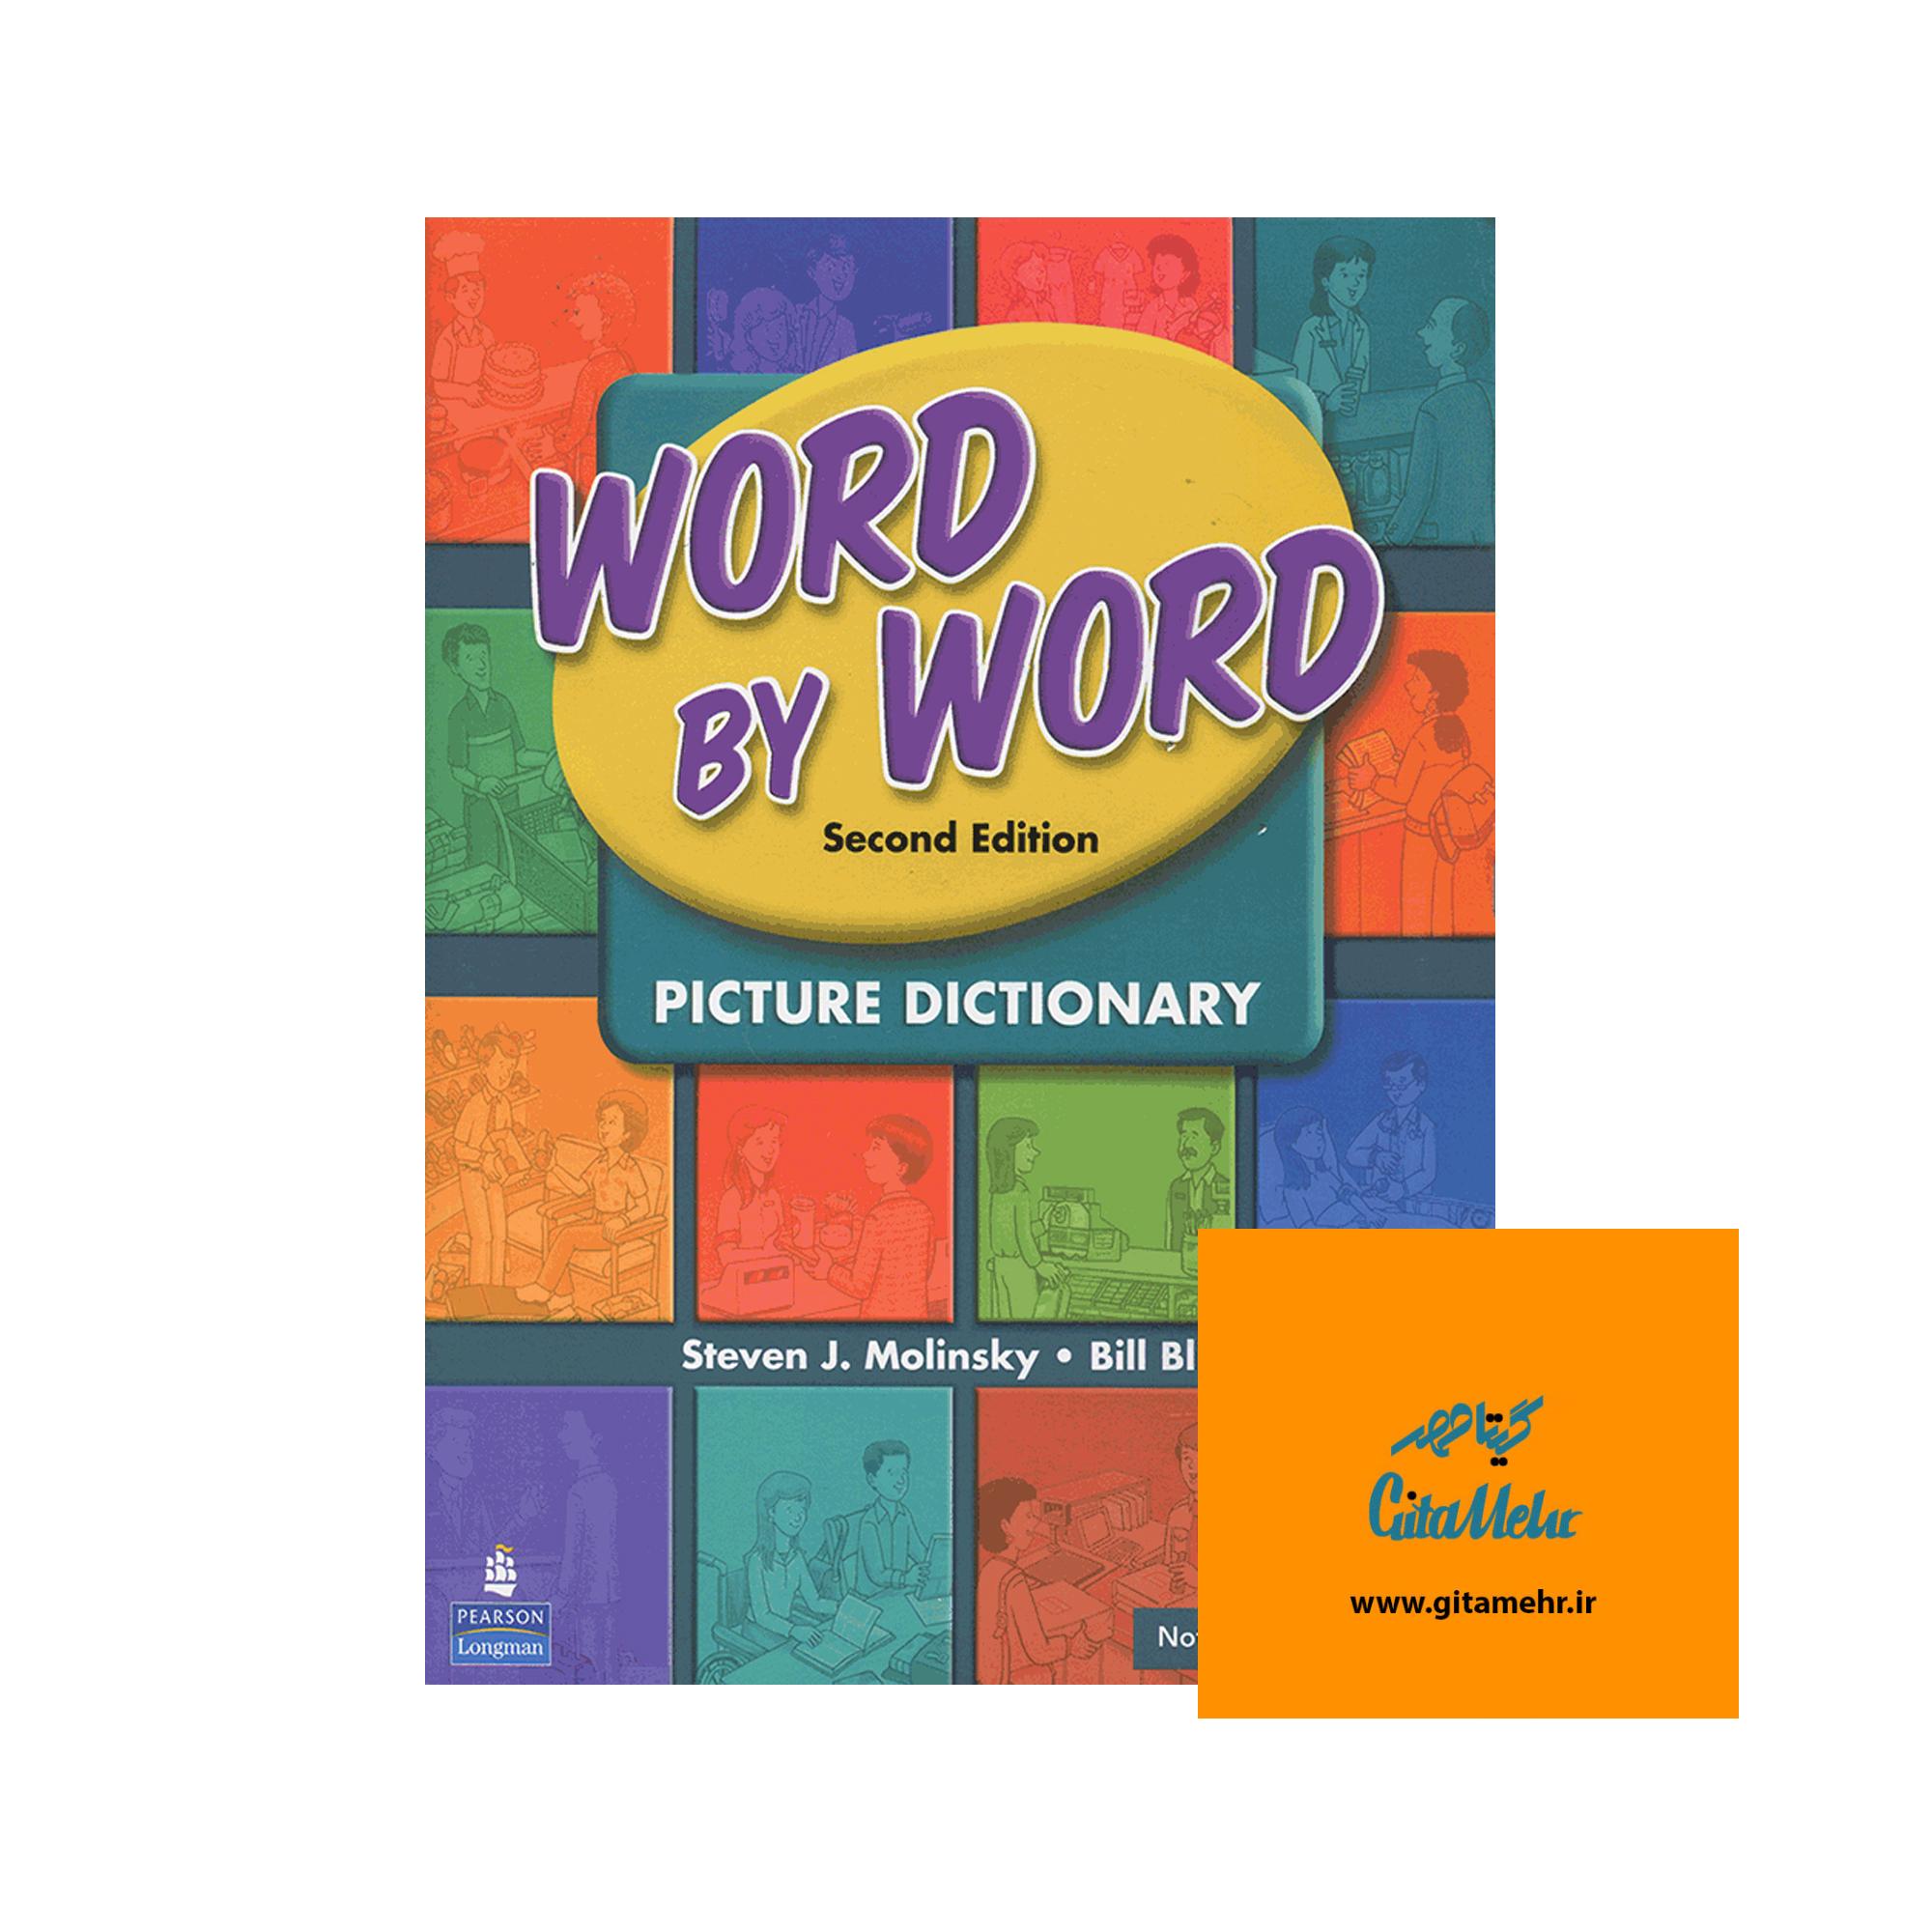 word by word picture dictionary 2nd daa9d8aad8a7d8a8 65f16be5579a4